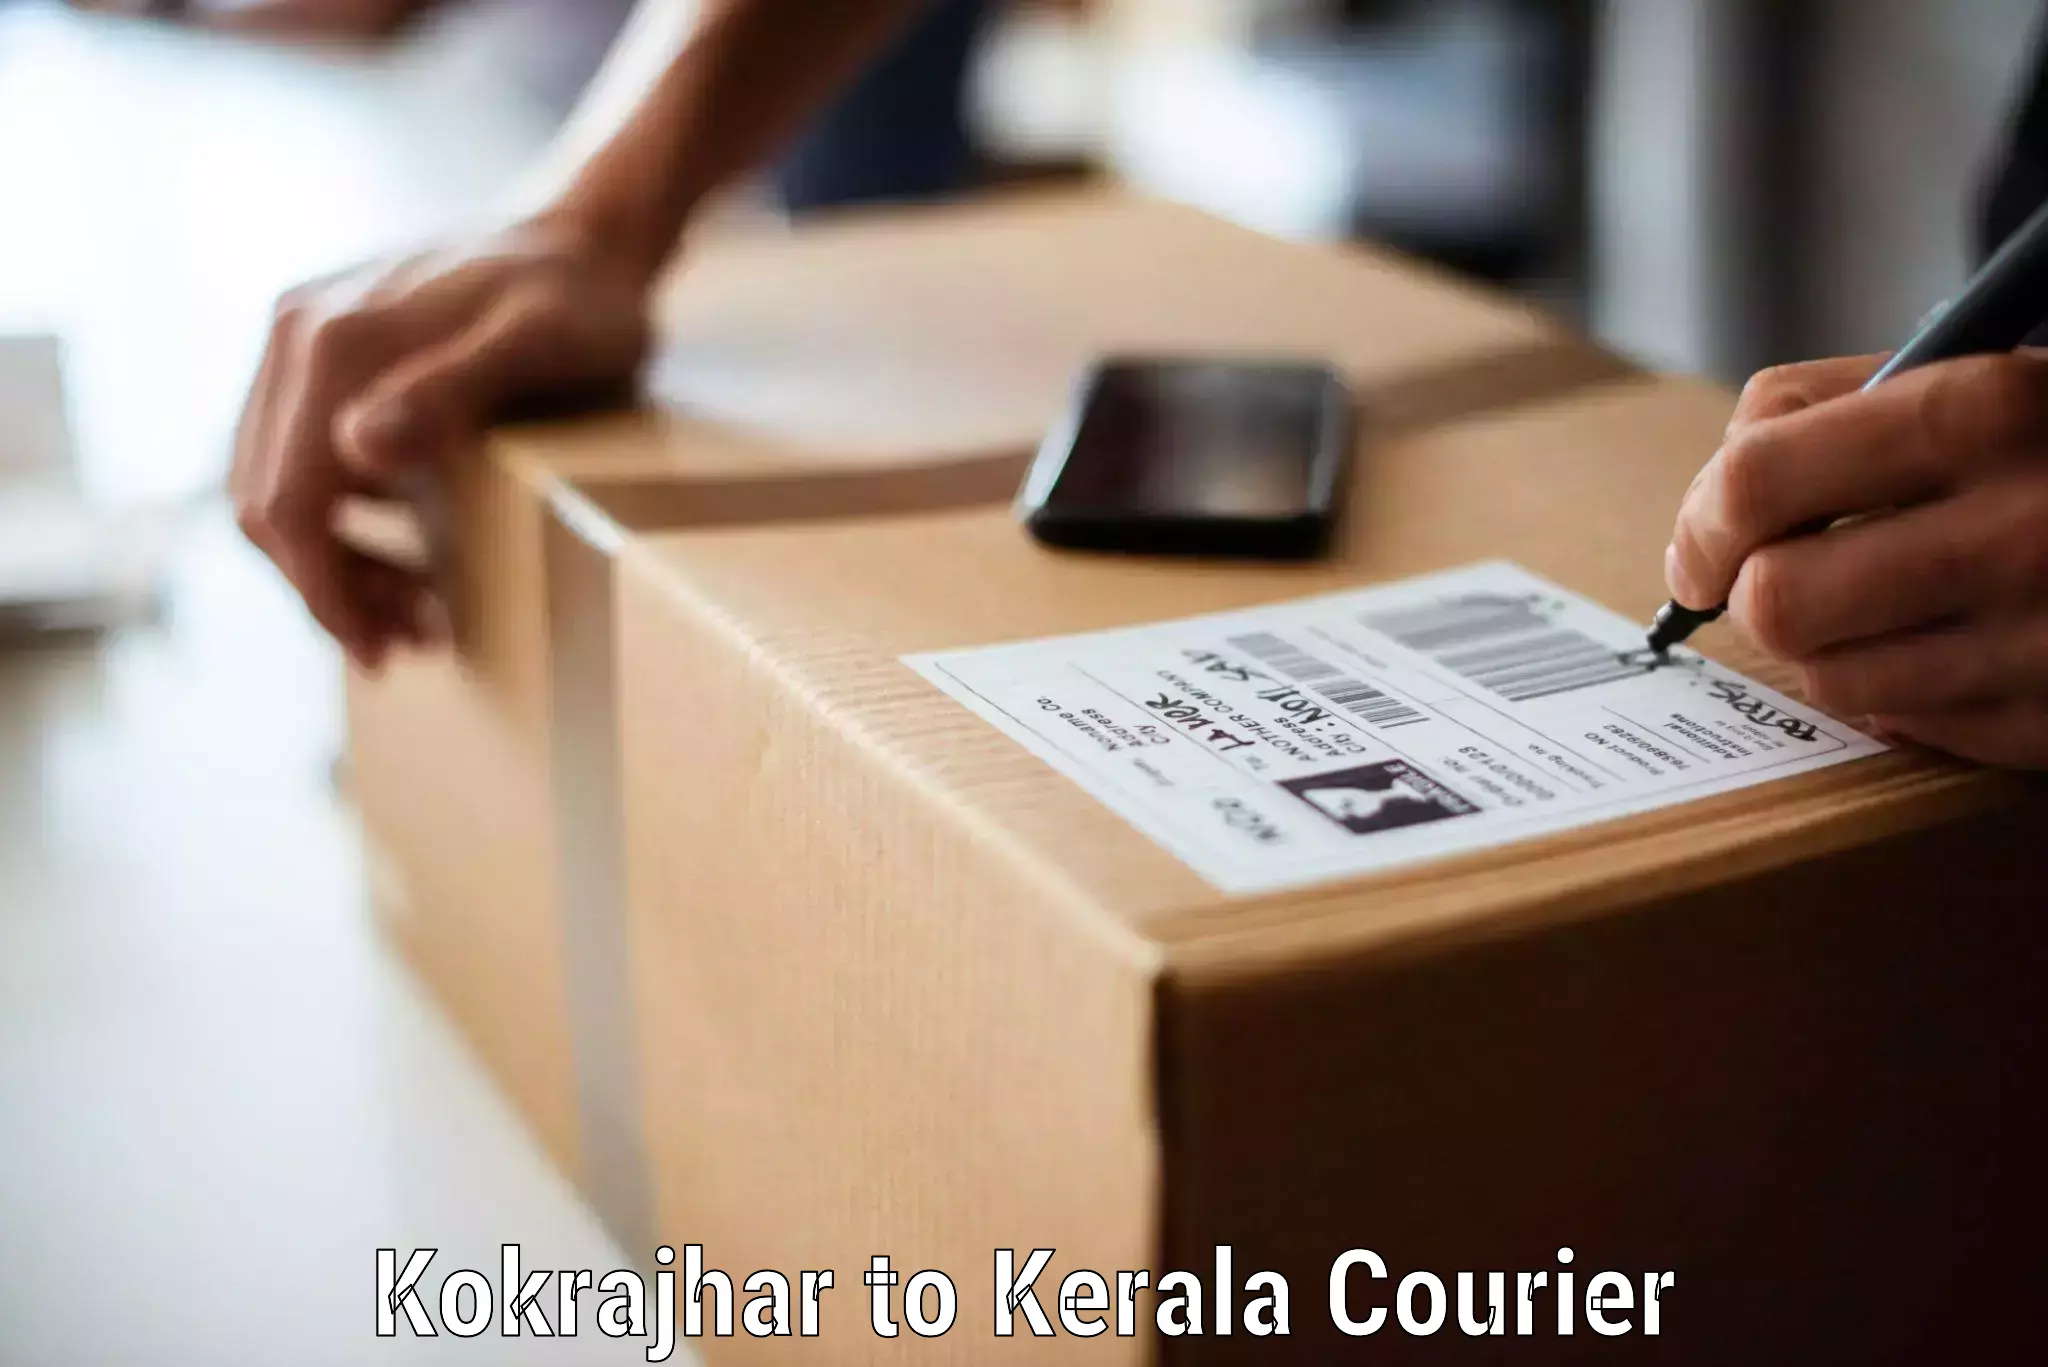 Trusted relocation experts Kokrajhar to Puthukkad